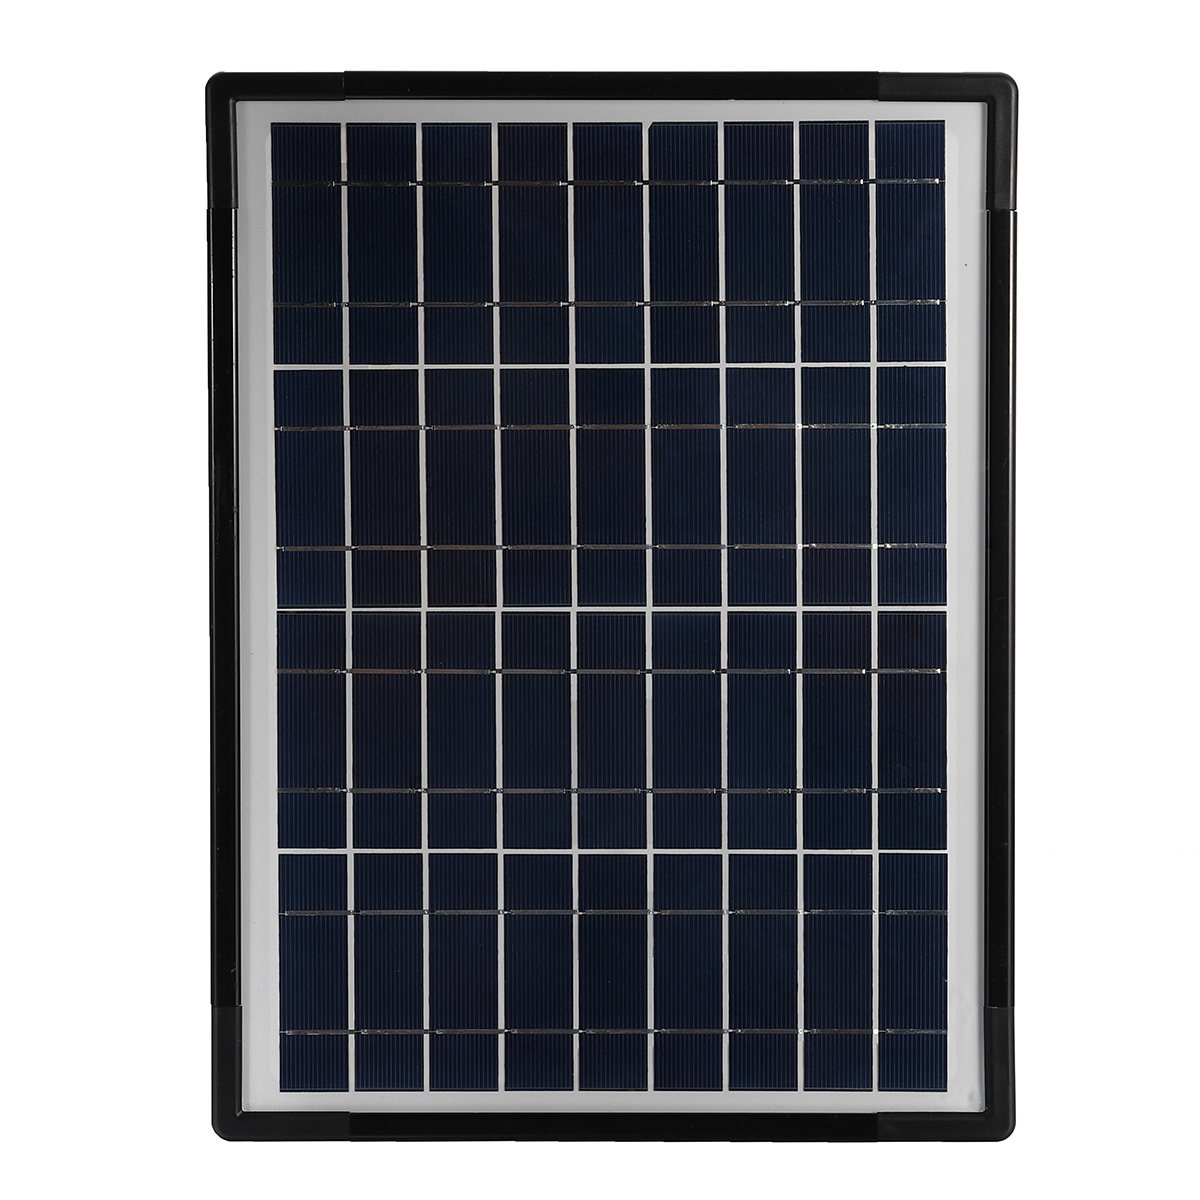 Find 10W Solar Power Panel Generator Storage LED Light USB Charger Home Outdoor System Kit for Sale on Gipsybee.com with cryptocurrencies